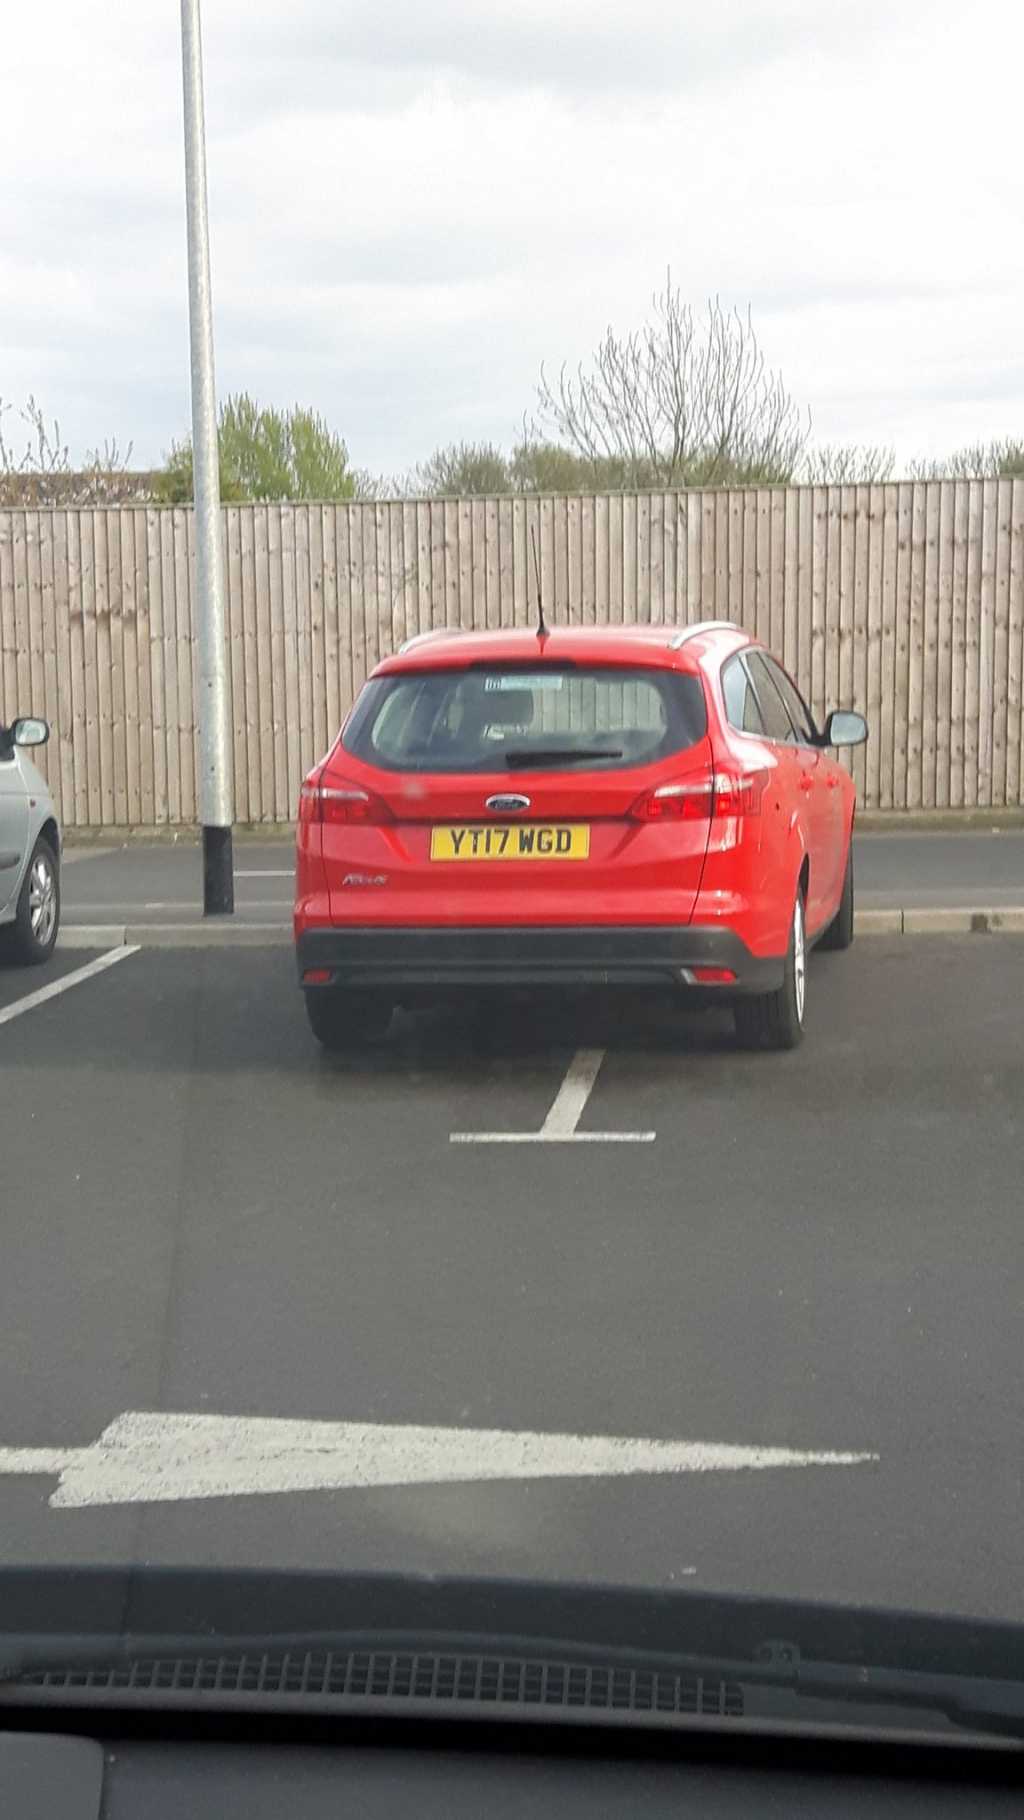 YT17 WGD displaying Inconsiderate Parking